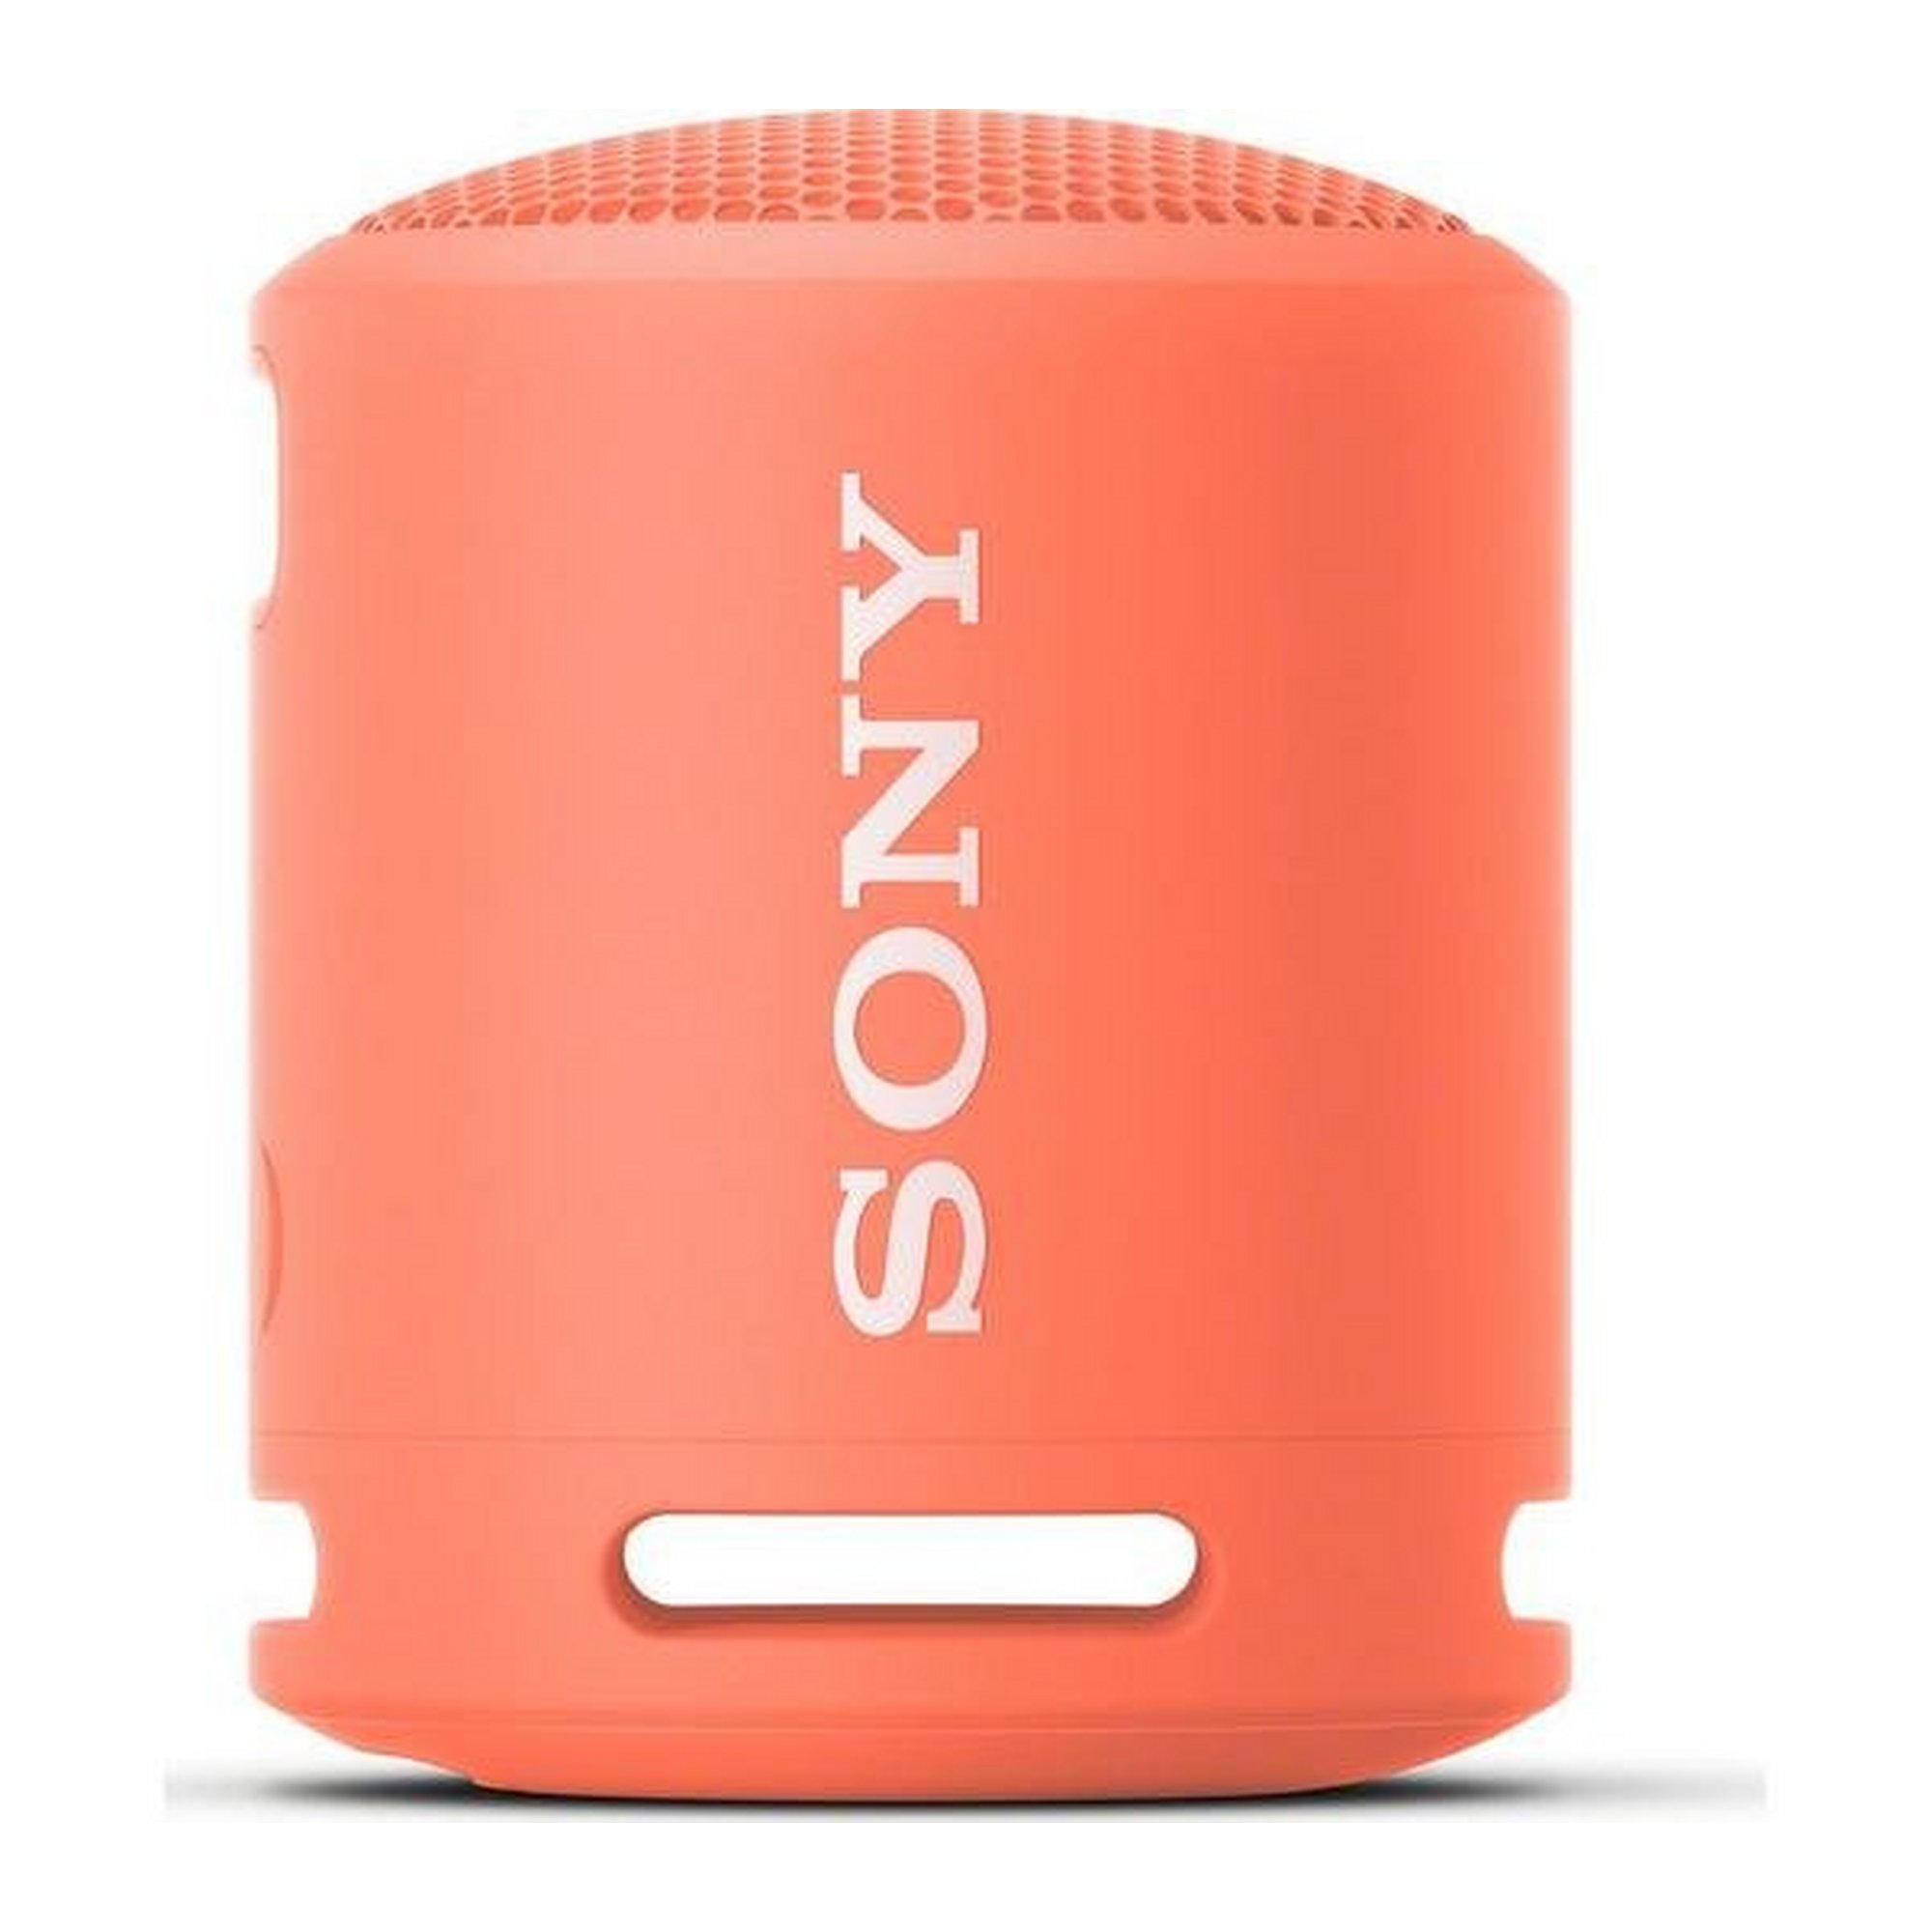 Sony SRS-XB13 Portable Bluetooth Speaker Coral Pink